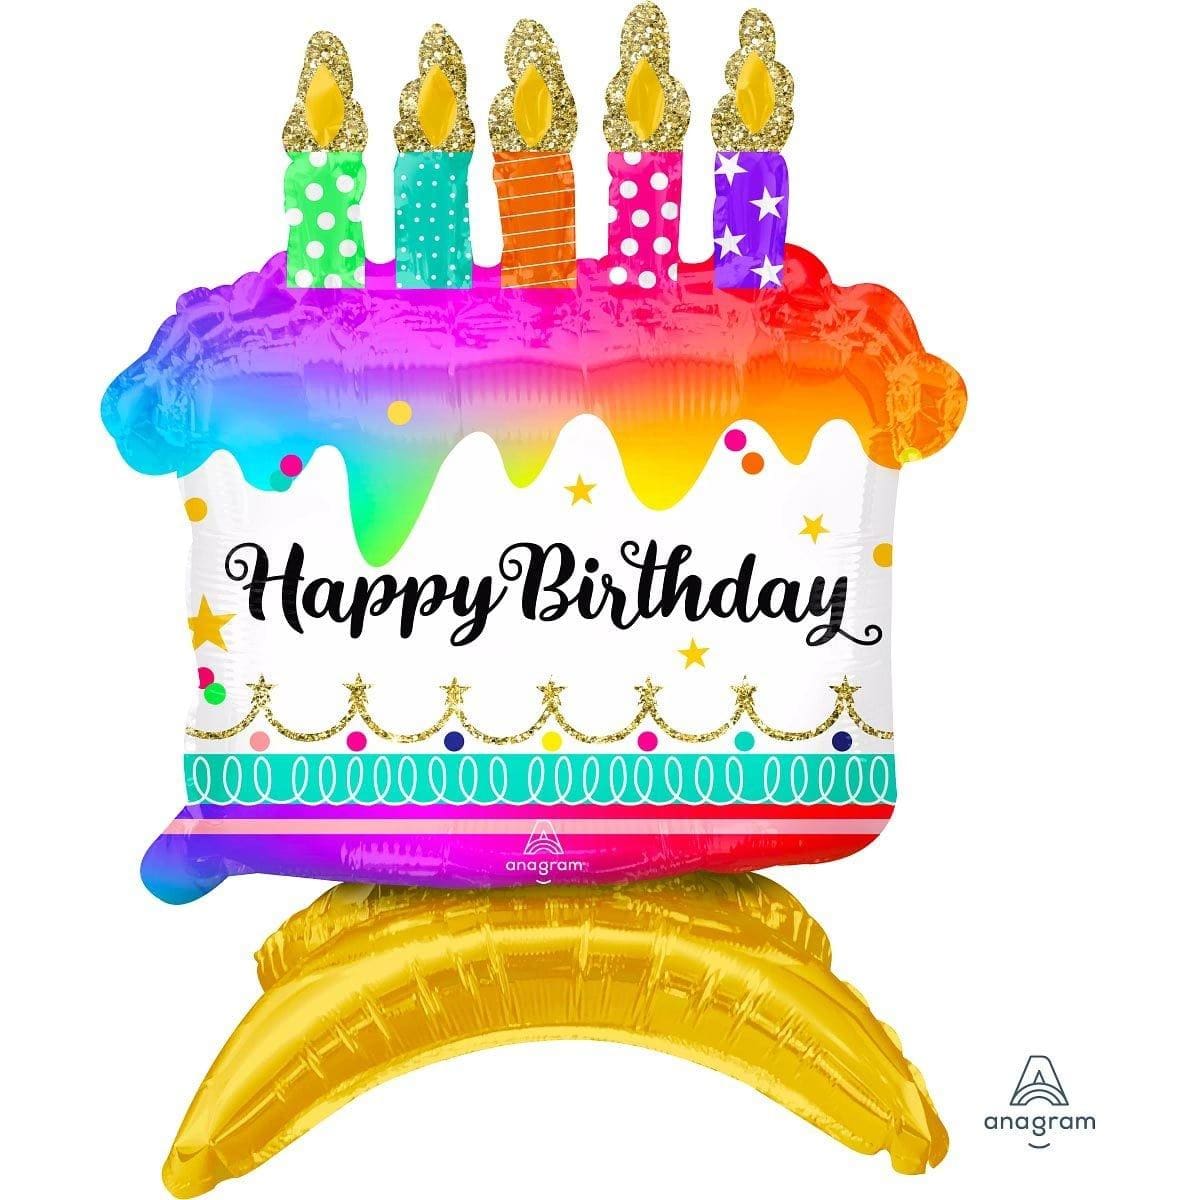 Buy Balloons Happy Birthday Cake Air Filled sold at Party Expert